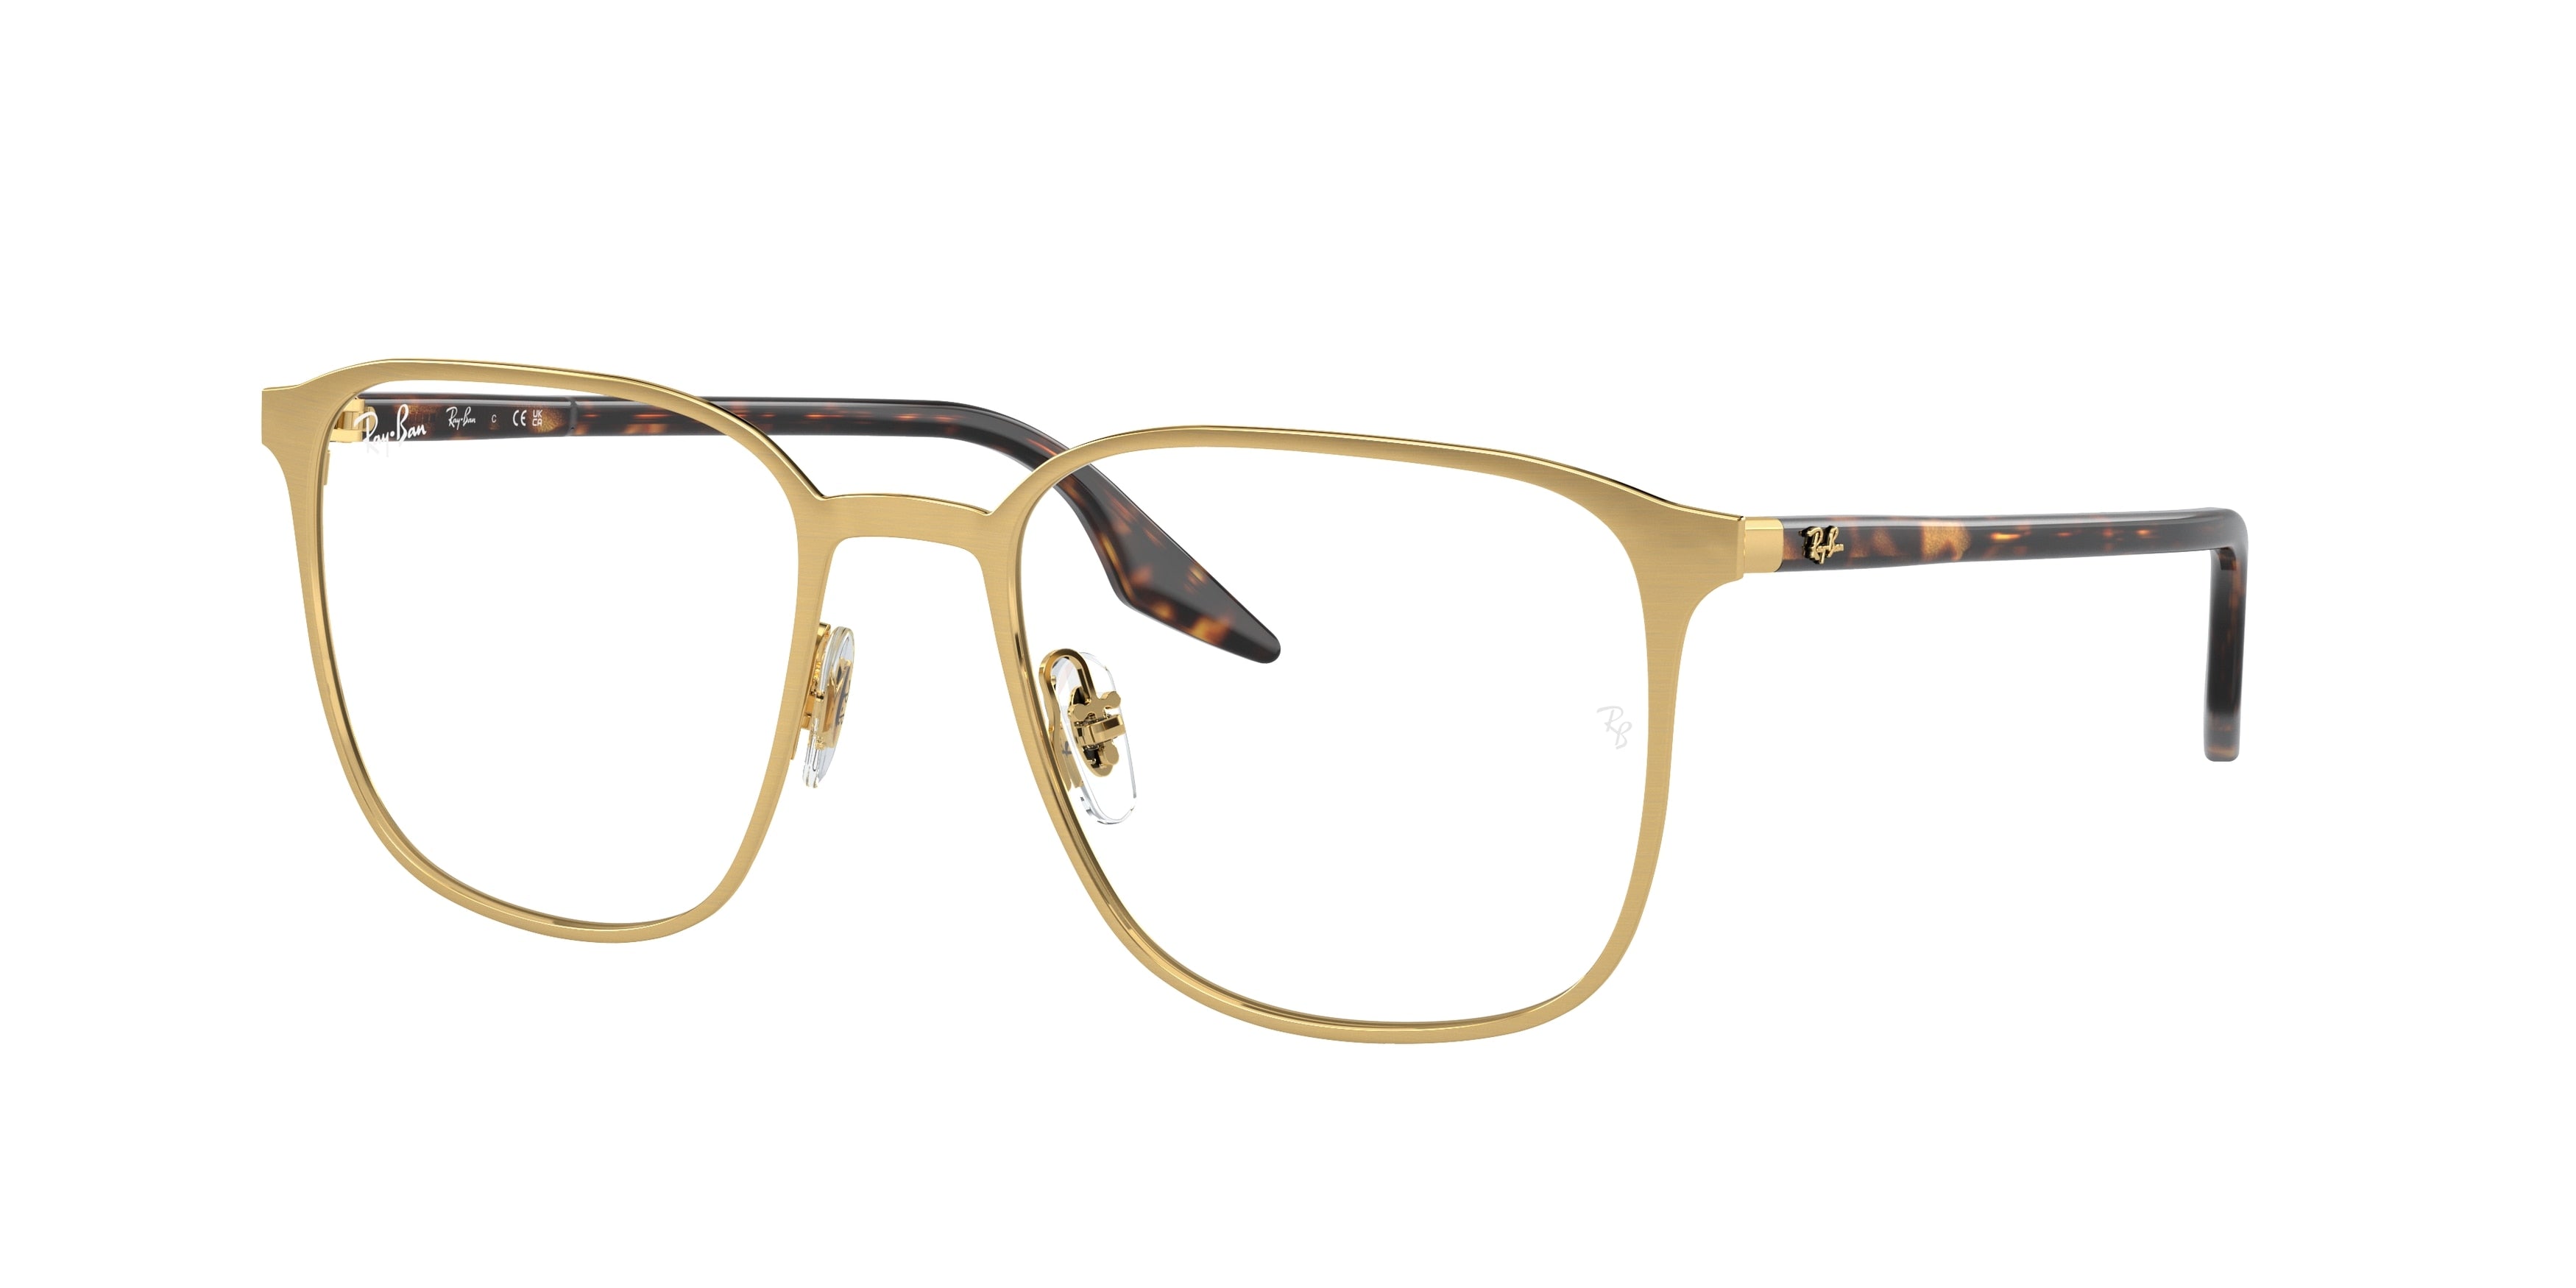 Ray-Ban Optical RX6512 Square Eyeglasses  2860-Gold 54-145-19 - Color Map Gold